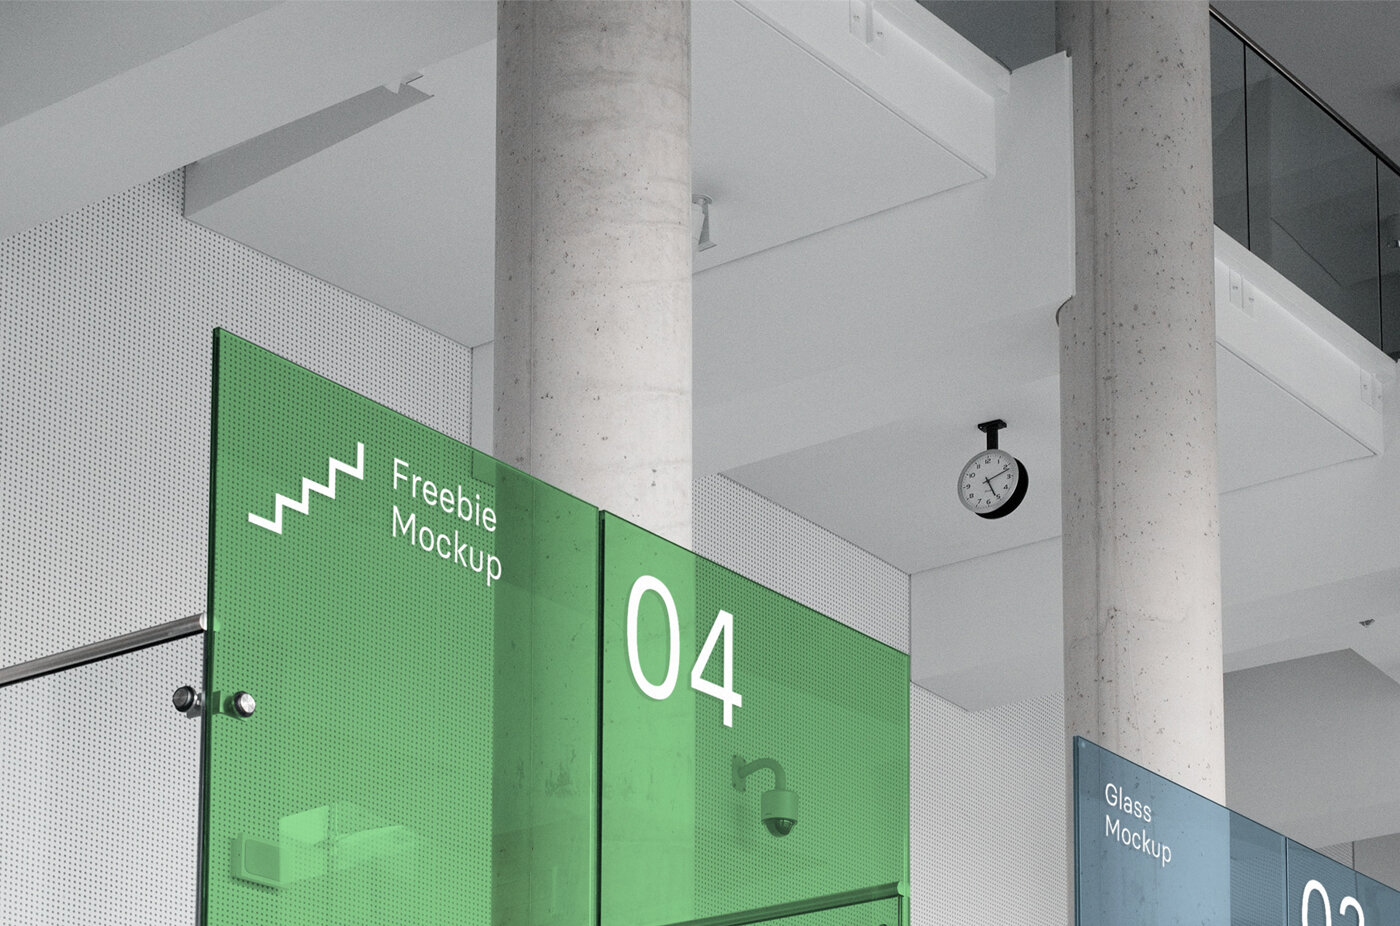 Download Office Glass Mockup - Free Download